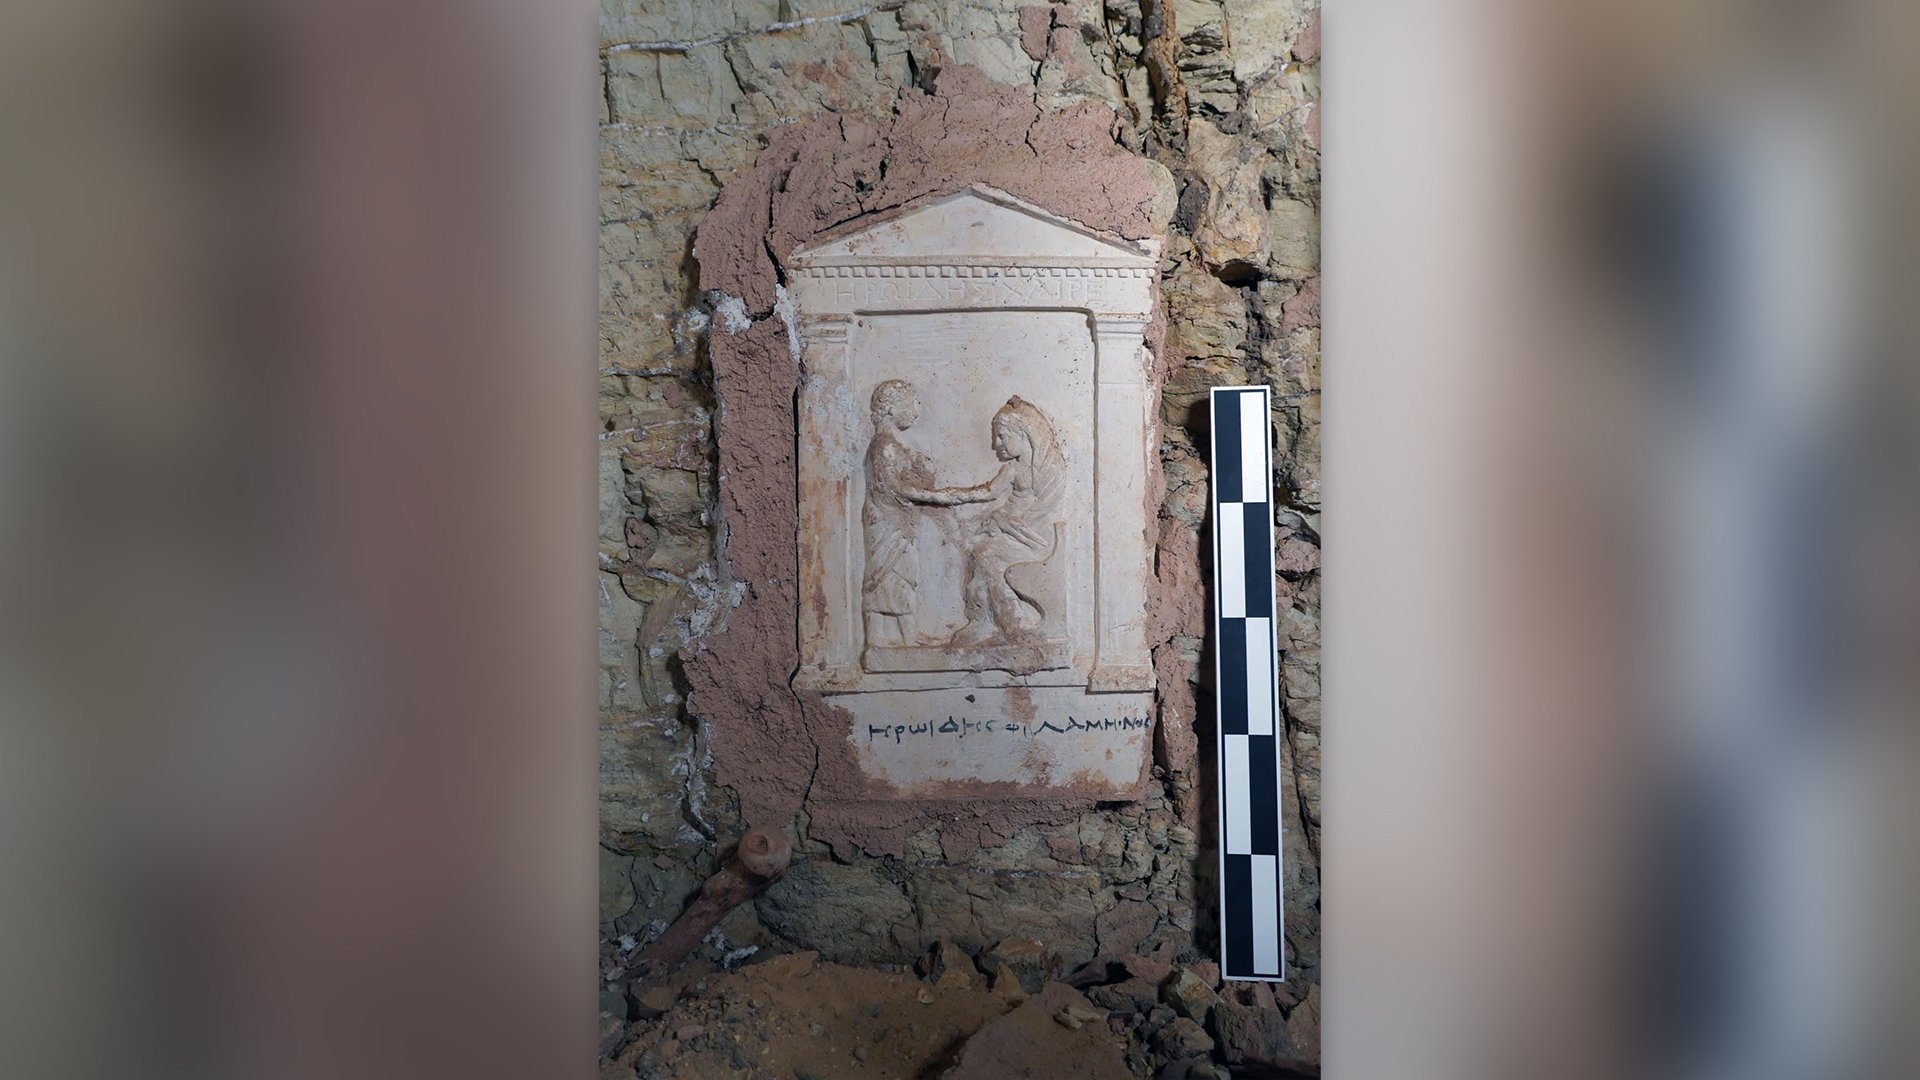 A relief found in an excavated tomb.